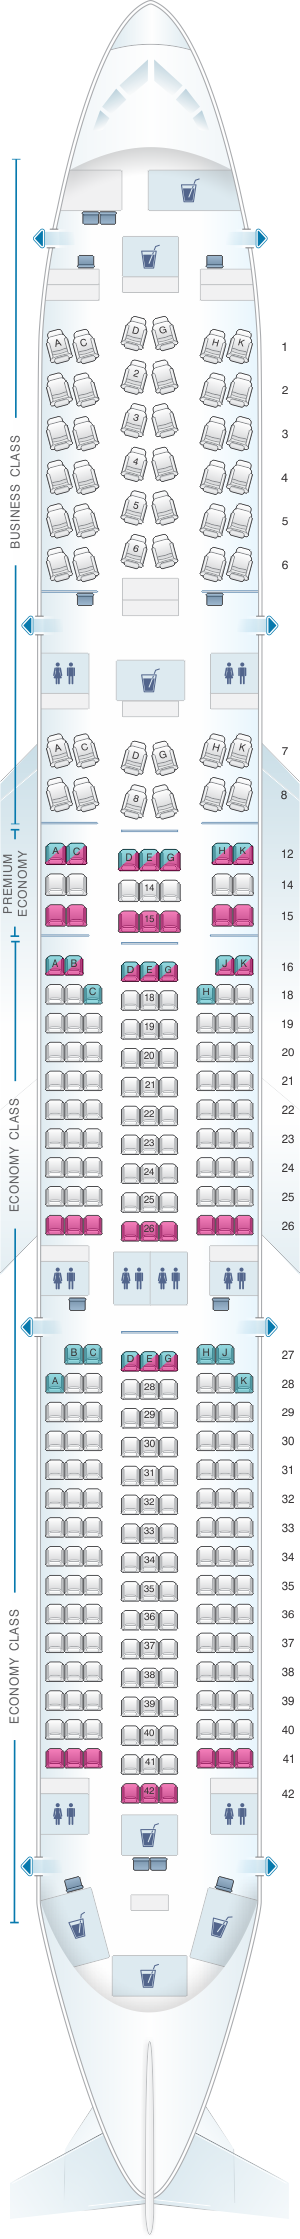 Seat map for Lufthansa Airbus A350 900 Config.1